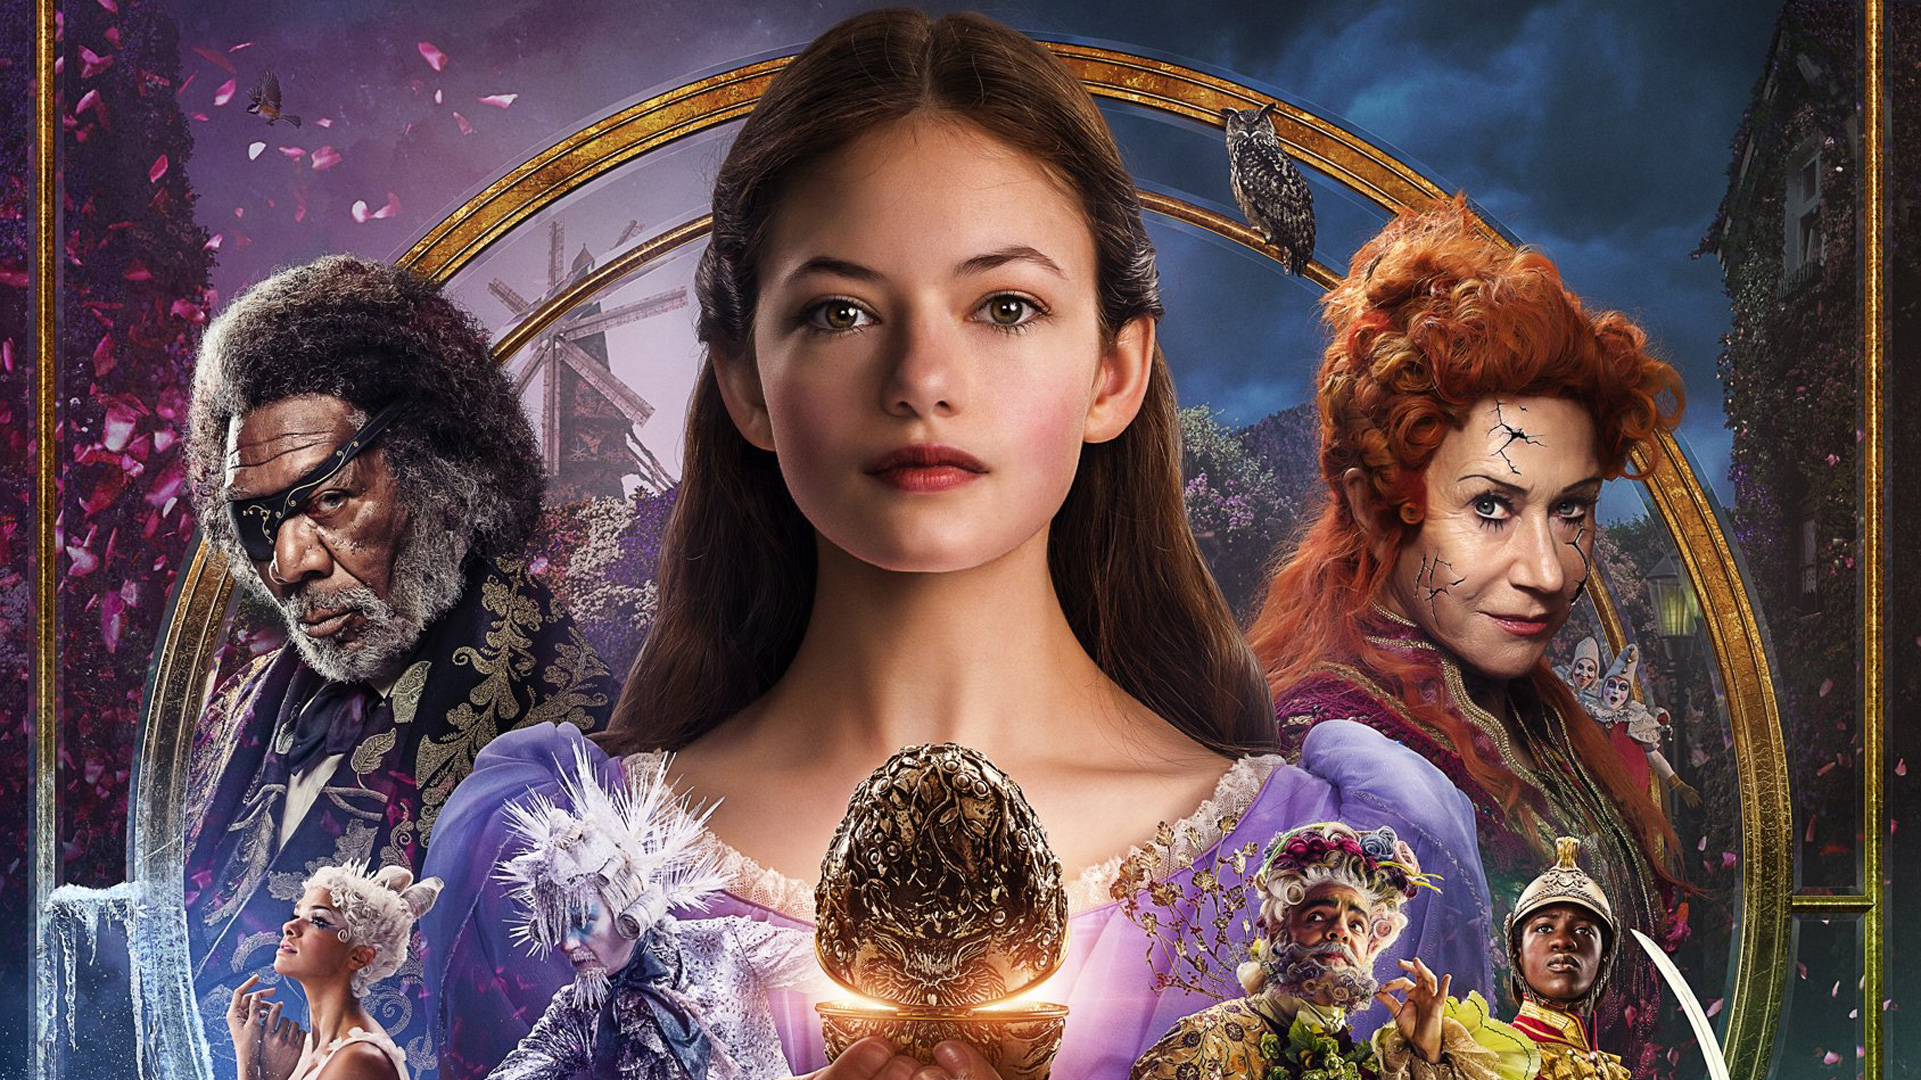 Movie The Nutcracker and the Four Realms HD Wallpaper | Background Image